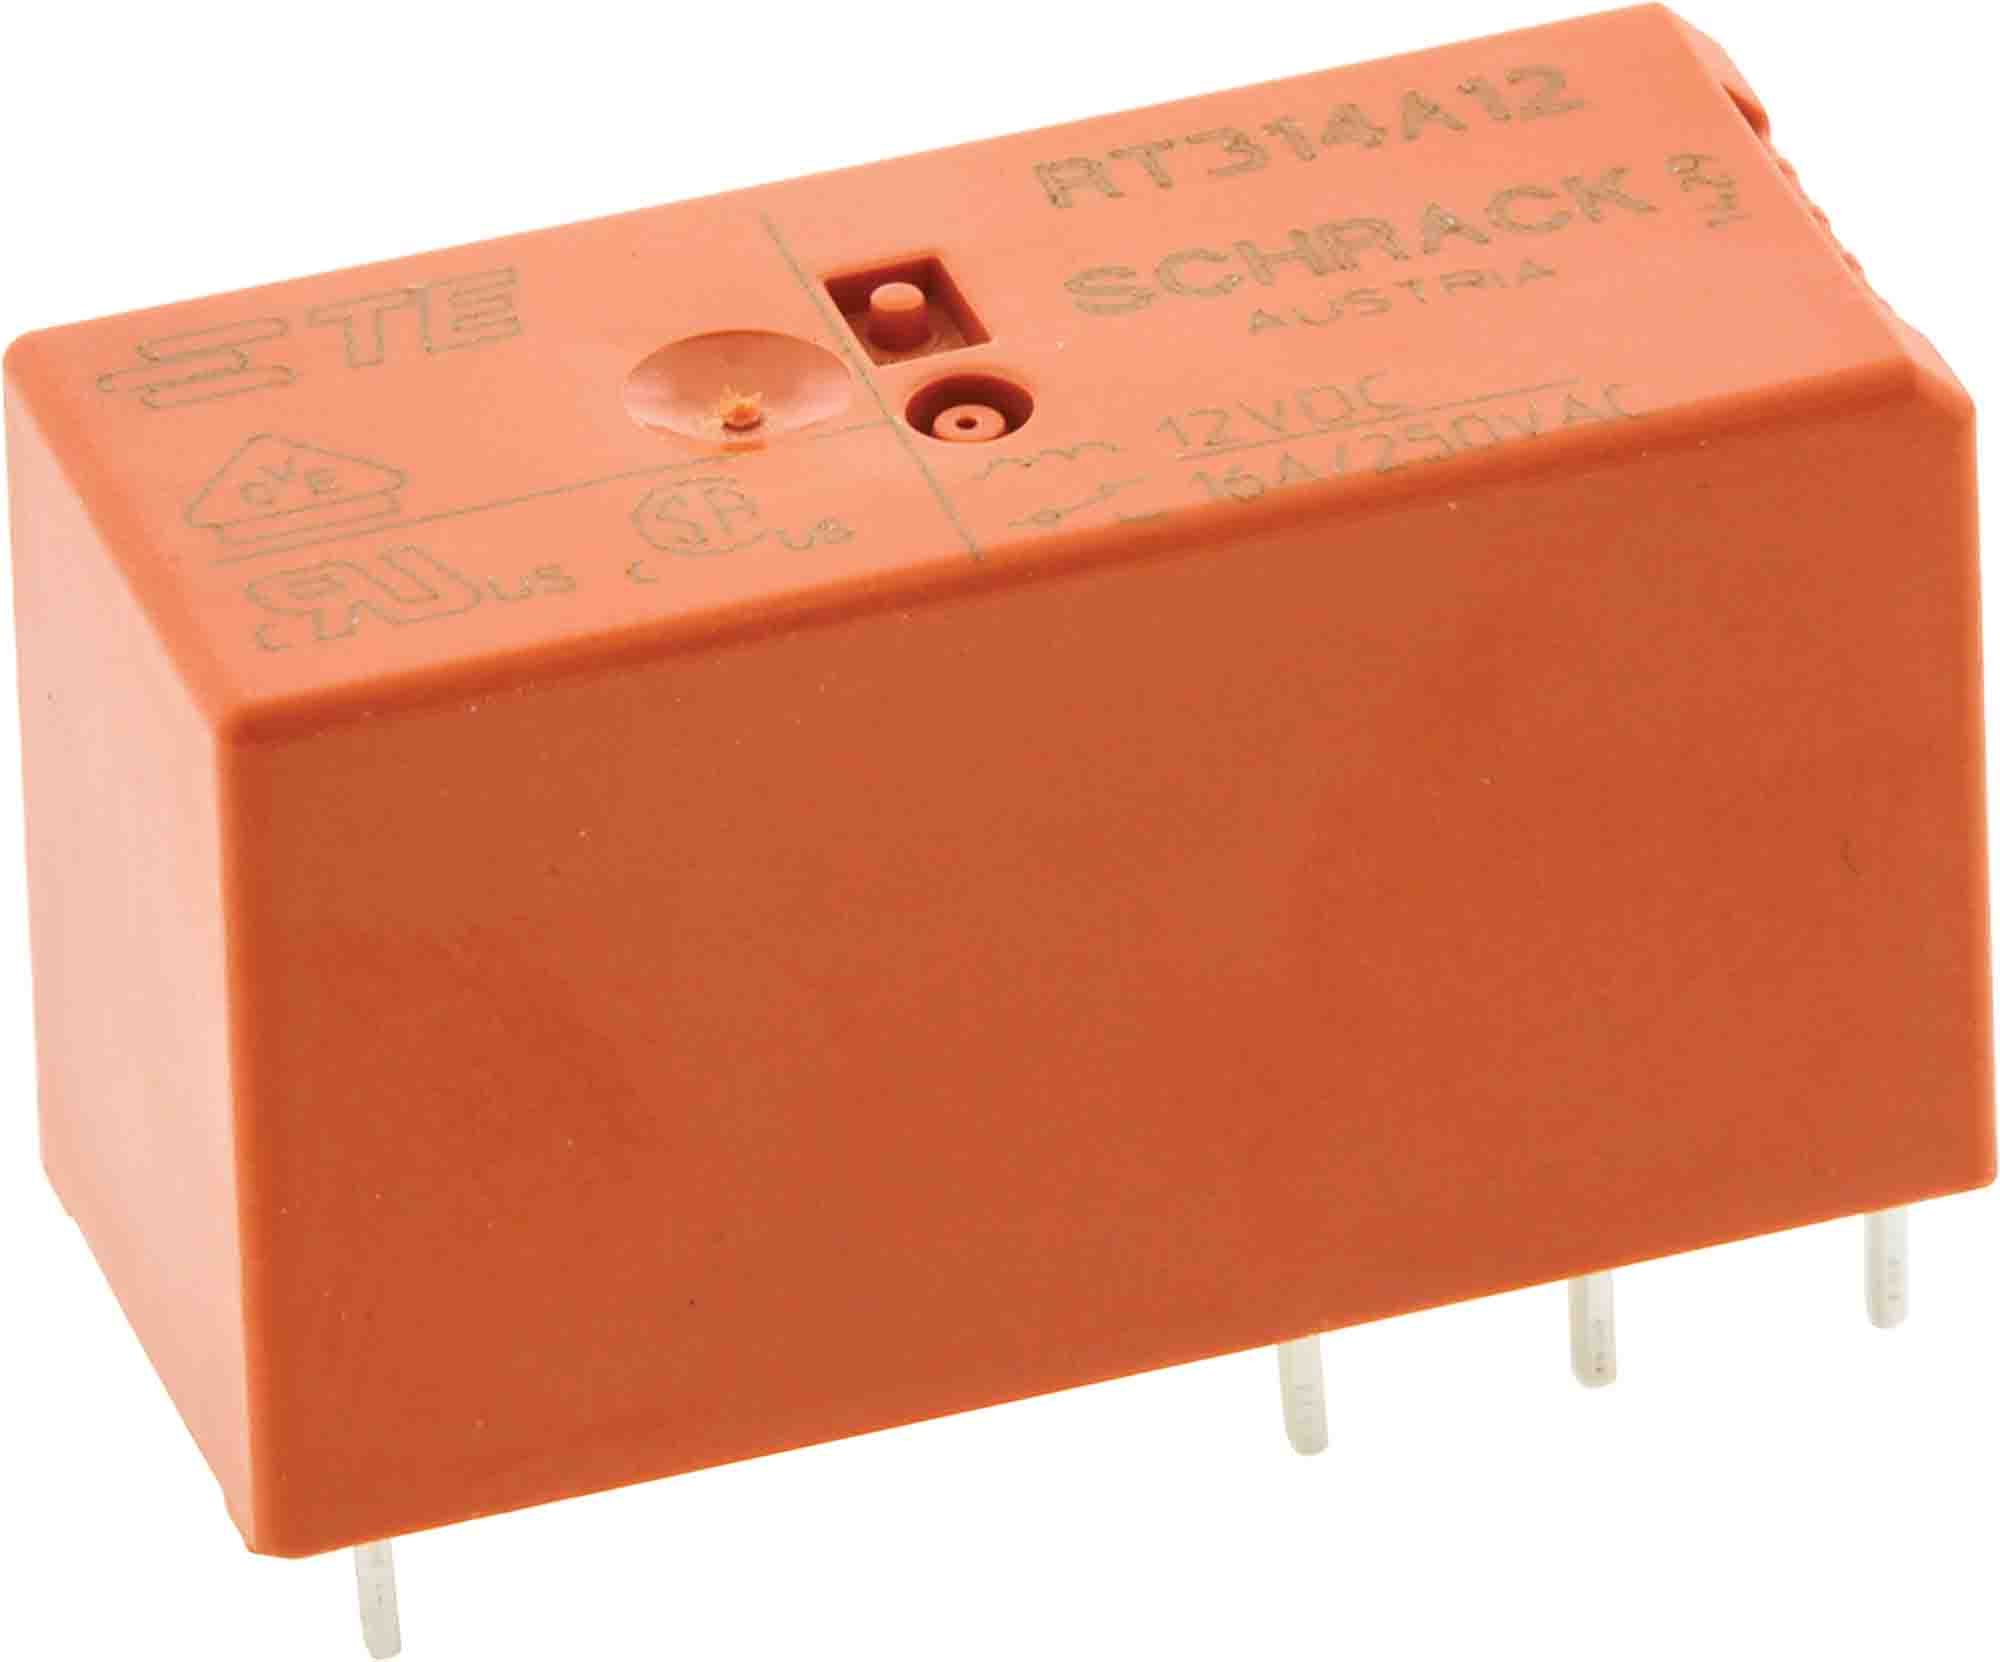 TE Connectivity PCB Mount Latching Power Relay, 12V dc Coil, 16A Switching Current, SPDT